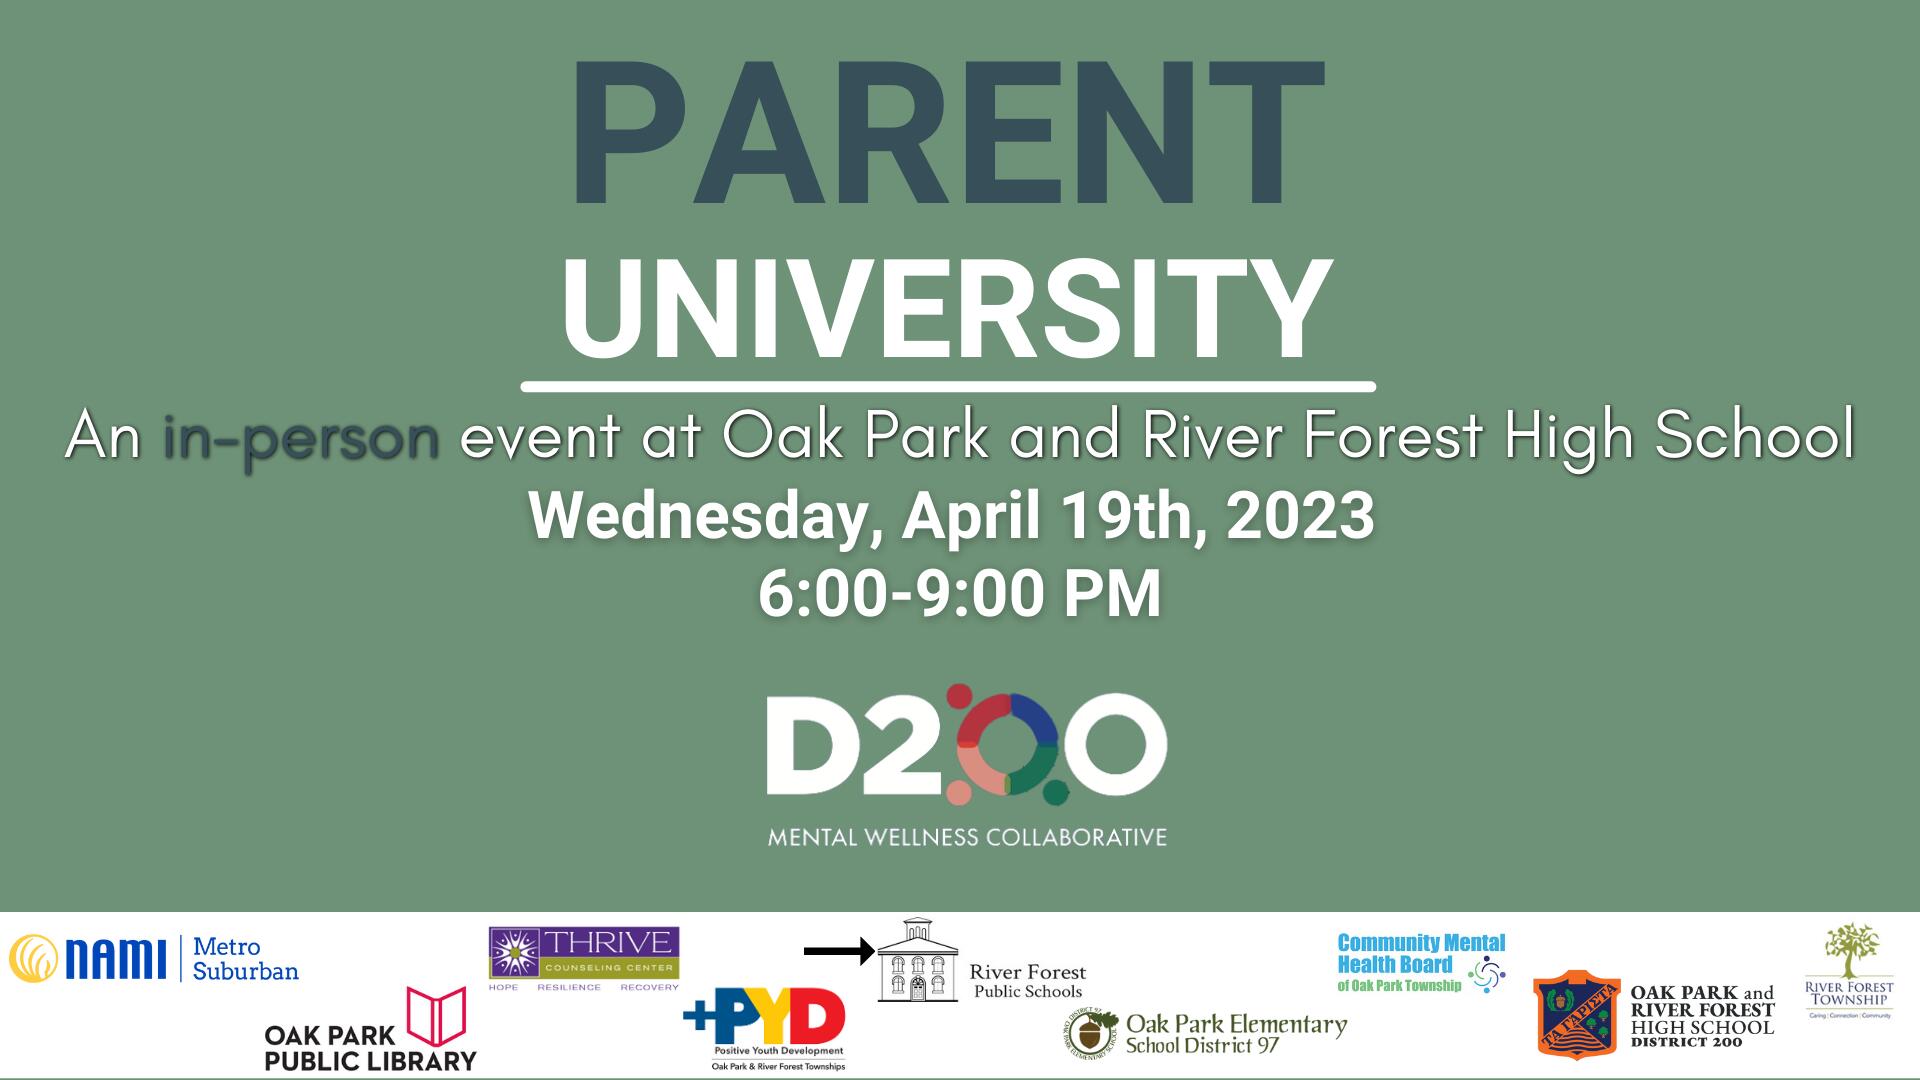 Save the date for Parent University